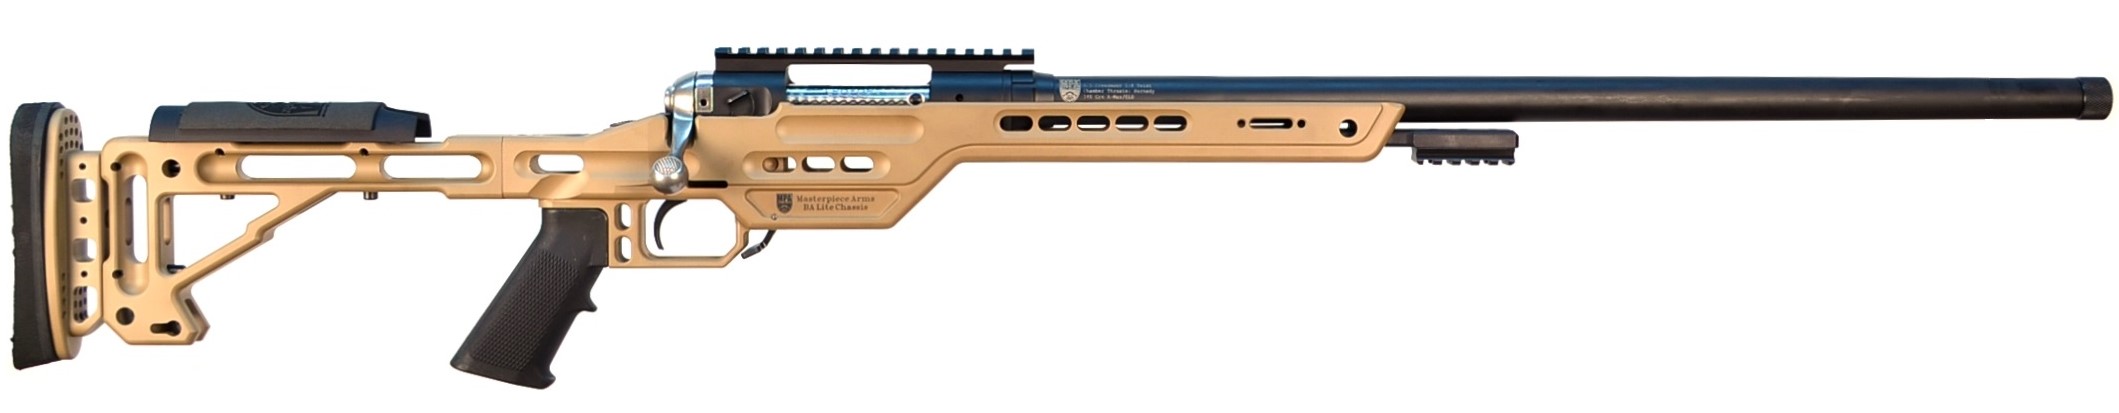 MasterPiece Arms Introduces the MPA BA Lite PCR Competition Rifle - Laura B...